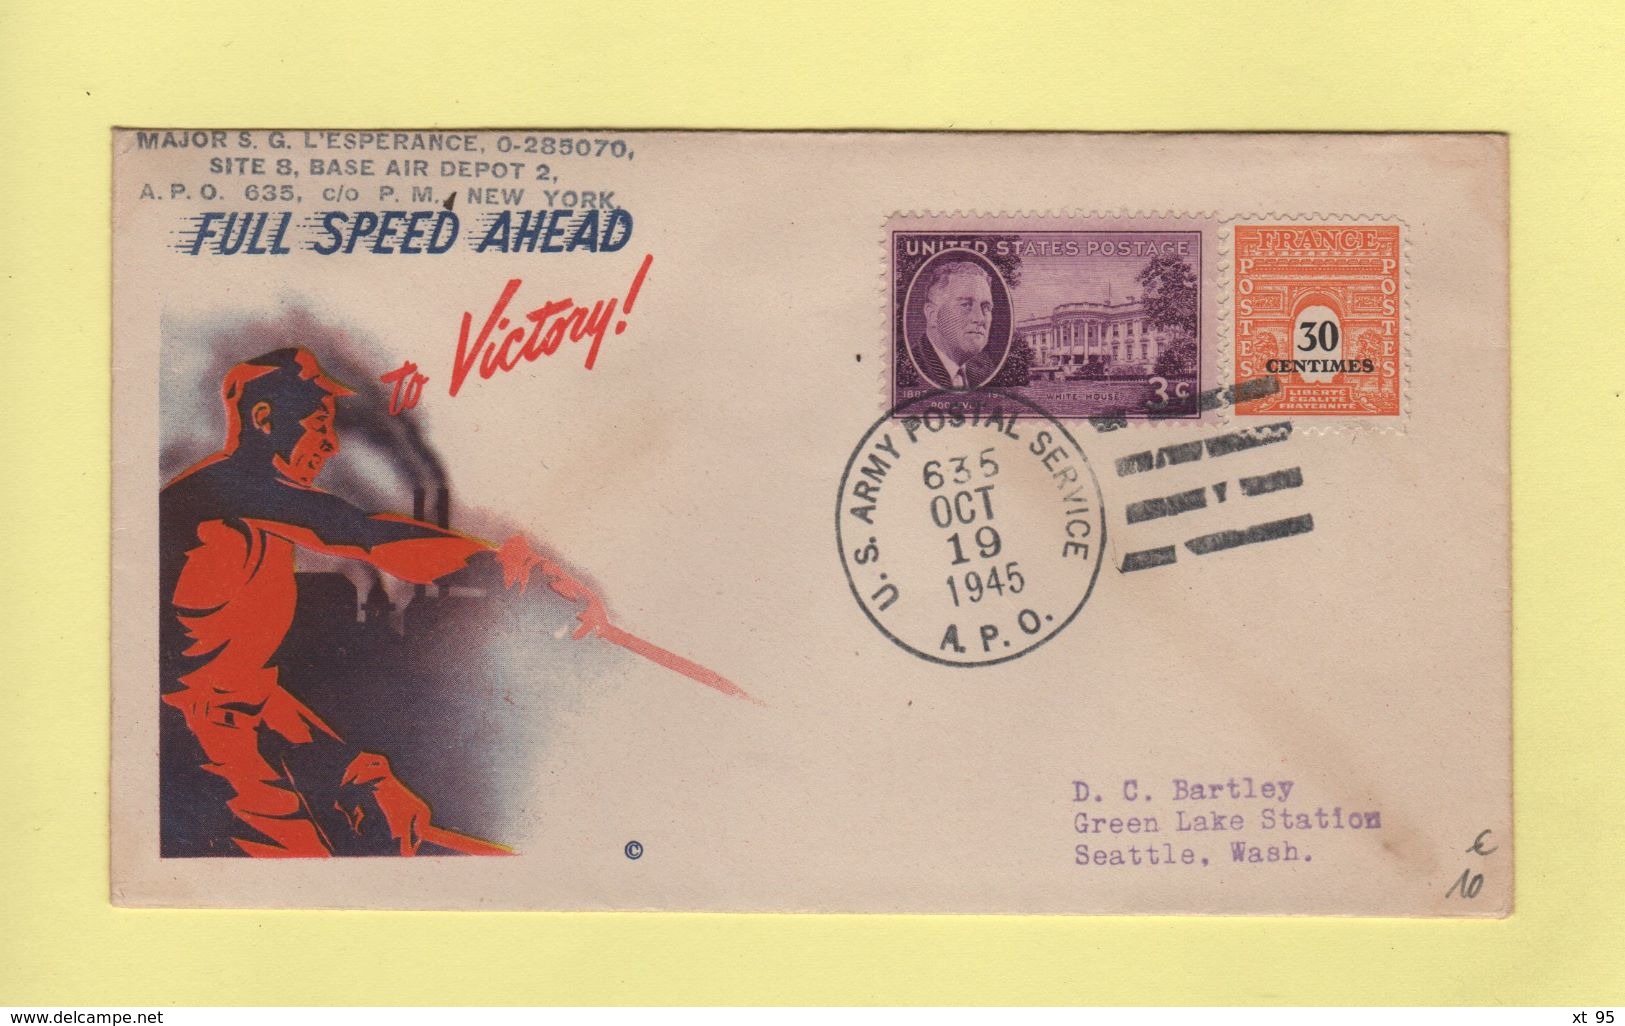 APO 635 - US Postal Army Service - 19 Oct 1945 - Mixte US France - Full Speed Ahead For Victory - WW II